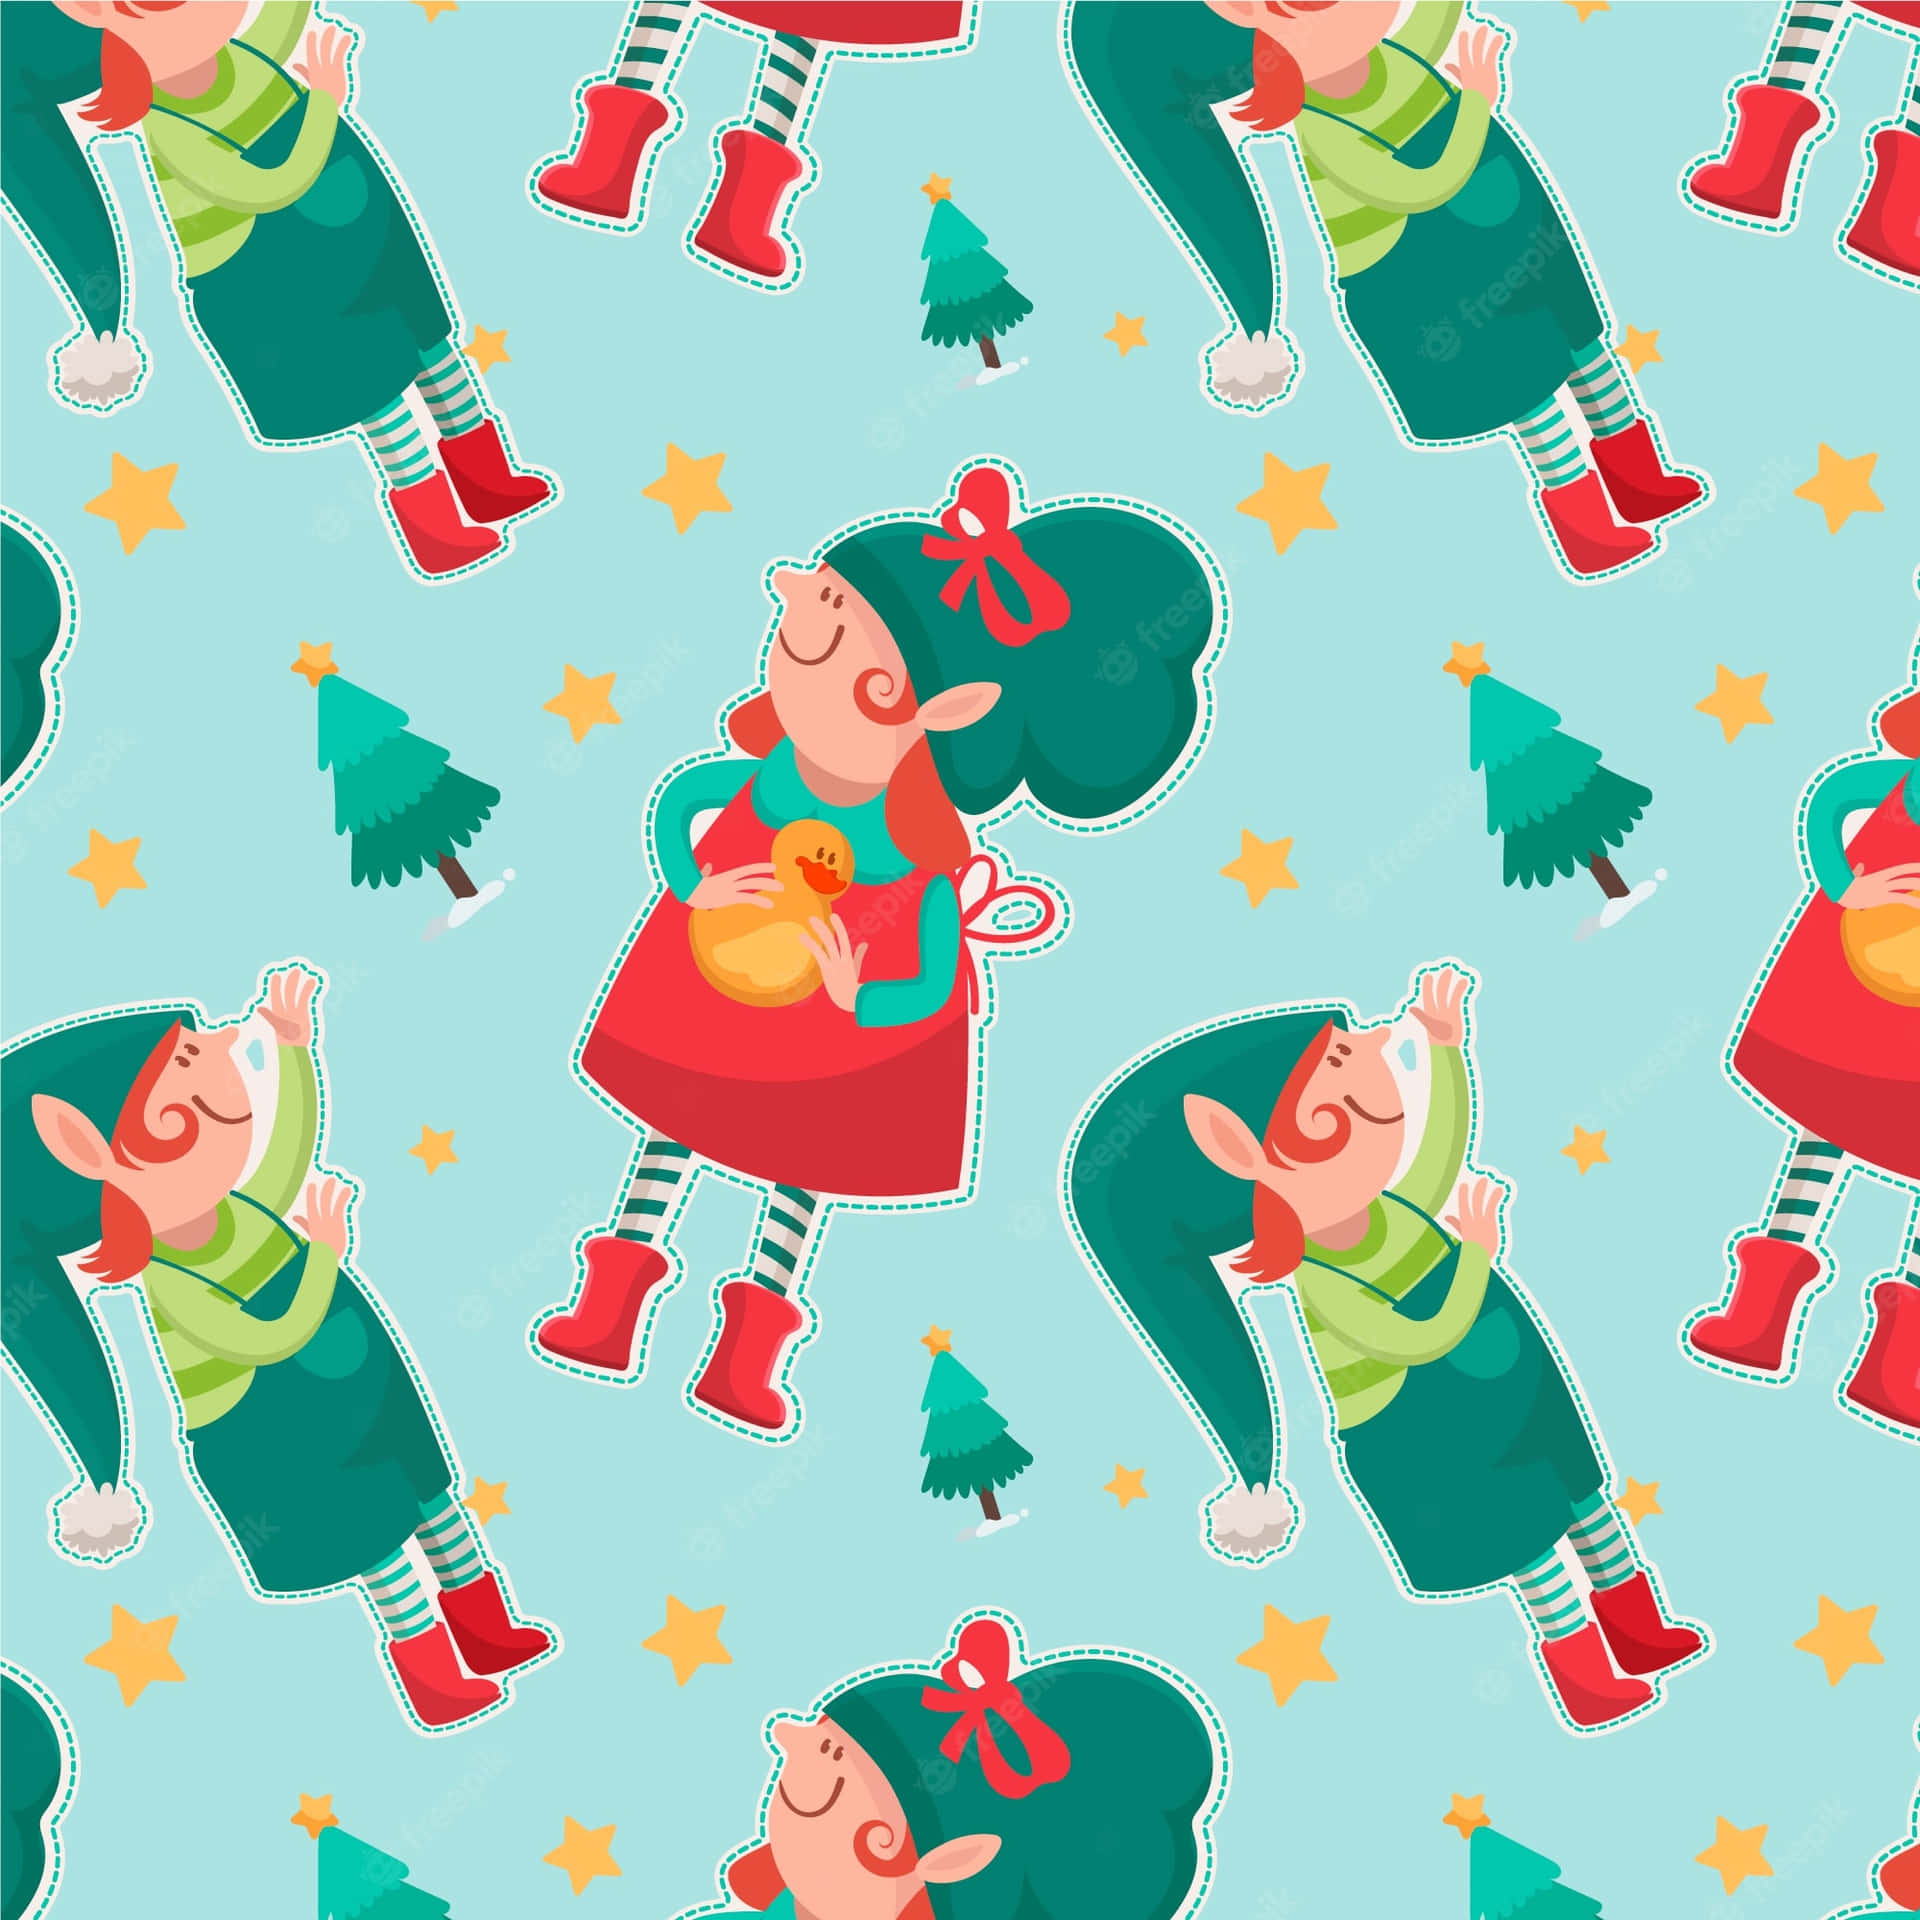 Meet our Christmas Elves, preparing for the holidays! Wallpaper